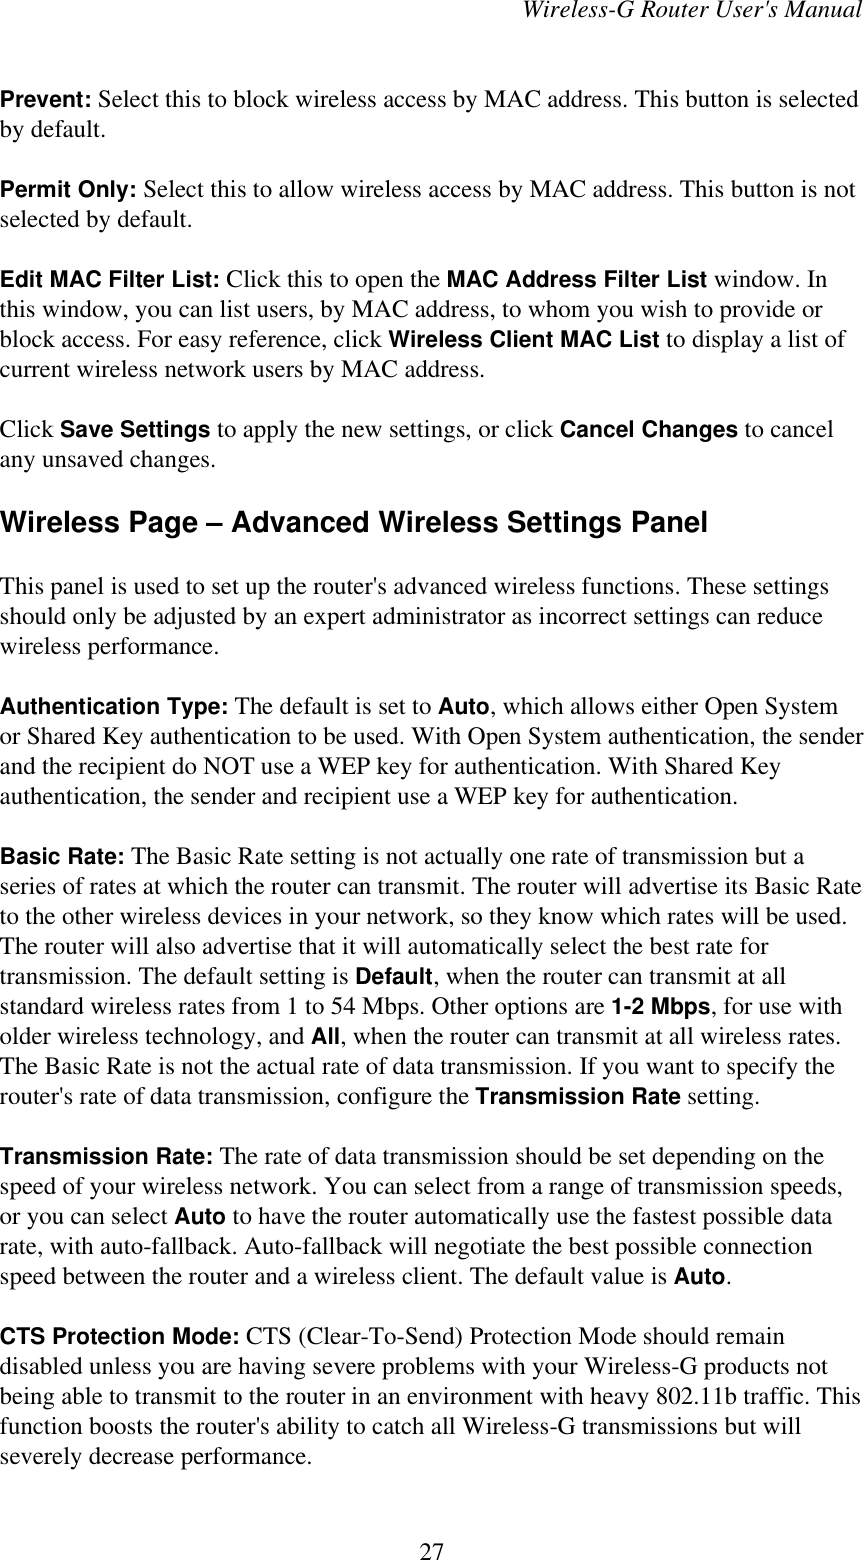 Wireless-G Router User&apos;s ManualPrevent: Select this to block wireless access by MAC address. This button is selectedby default.Permit Only: Select this to allow wireless access by MAC address. This button is notselected by default.Edit MAC Filter List: Click this to open the MAC Address Filter List window. Inthis window, you can list users, by MAC address, to whom you wish to provide orblock access. For easy reference, click Wireless Client MAC List to display a list ofcurrent wireless network users by MAC address.Click Save Settings to apply the new settings, or click Cancel Changes to cancelany unsaved changes.Wireless Page – Advanced Wireless Settings PanelThis panel is used to set up the router&apos;s advanced wireless functions. These settingsshould only be adjusted by an expert administrator as incorrect settings can reducewireless performance.Authentication Type: The default is set to Auto, which allows either Open Systemor Shared Key authentication to be used. With Open System authentication, the senderand the recipient do NOT use a WEP key for authentication. With Shared Keyauthentication, the sender and recipient use a WEP key for authentication.Basic Rate: The Basic Rate setting is not actually one rate of transmission but aseries of rates at which the router can transmit. The router will advertise its Basic Rateto the other wireless devices in your network, so they know which rates will be used.The router will also advertise that it will automatically select the best rate fortransmission. The default setting is Default, when the router can transmit at allstandard wireless rates from 1 to 54 Mbps. Other options are 1-2 Mbps, for use witholder wireless technology, and All, when the router can transmit at all wireless rates.The Basic Rate is not the actual rate of data transmission. If you want to specify therouter&apos;s rate of data transmission, configure the Transmission Rate setting.Transmission Rate: The rate of data transmission should be set depending on thespeed of your wireless network. You can select from a range of transmission speeds,or you can select Auto to have the router automatically use the fastest possible datarate, with auto-fallback. Auto-fallback will negotiate the best possible connectionspeed between the router and a wireless client. The default value is Auto.CTS Protection Mode: CTS (Clear-To-Send) Protection Mode should remaindisabled unless you are having severe problems with your Wireless-G products notbeing able to transmit to the router in an environment with heavy 802.11b traffic. Thisfunction boosts the router&apos;s ability to catch all Wireless-G transmissions but willseverely decrease performance.27